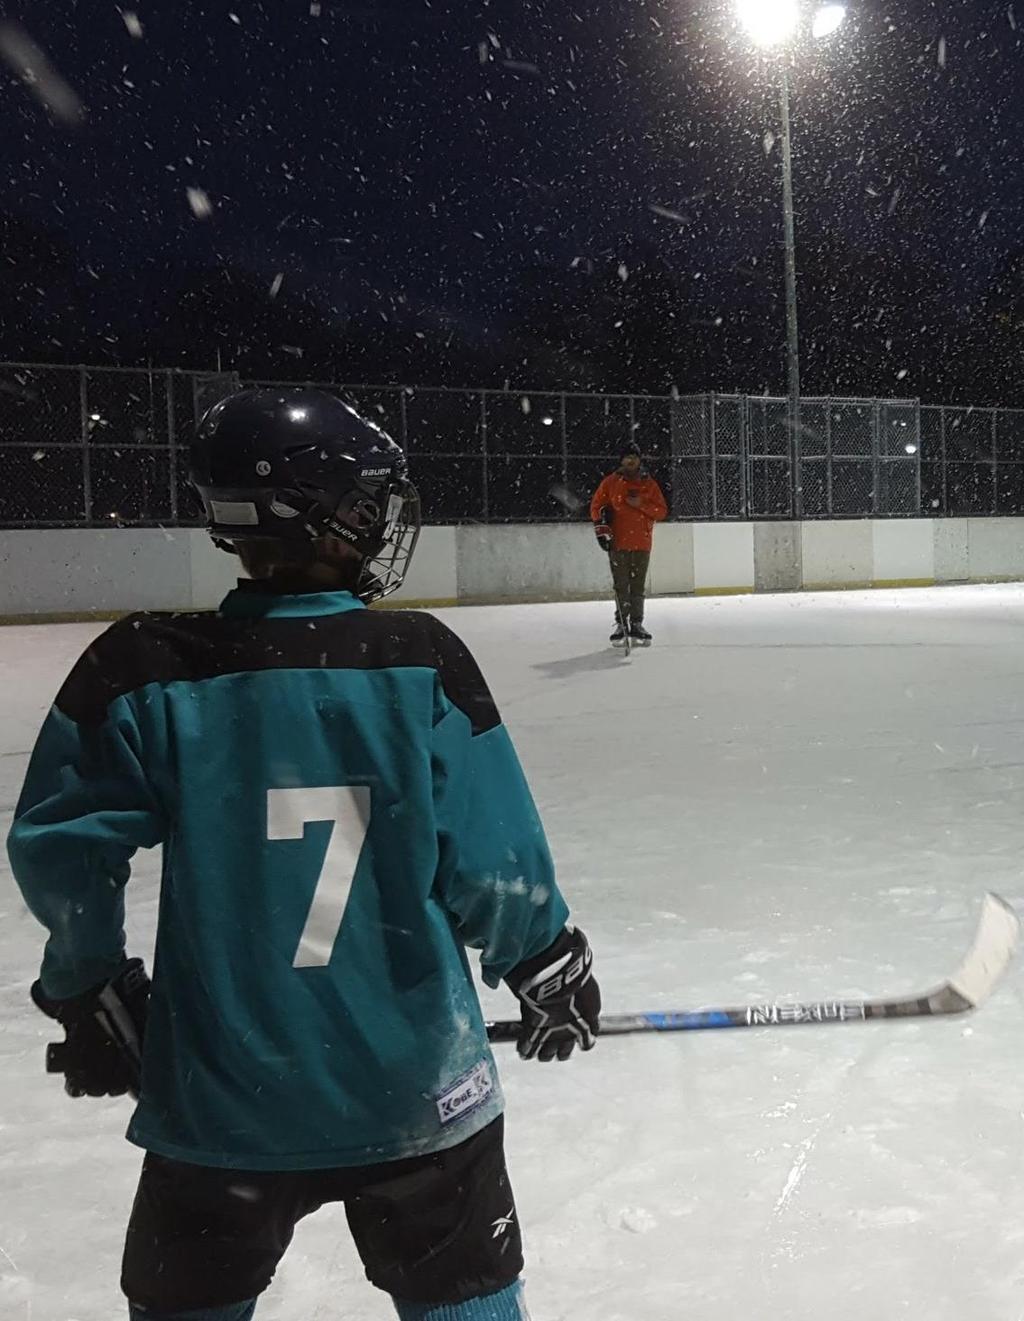 WEATHER POLICY As Mooredale s Outdoor Hockey program uses the outdoor rink at Rosedale Park, the weather plays a significant factor in cancellations each season.